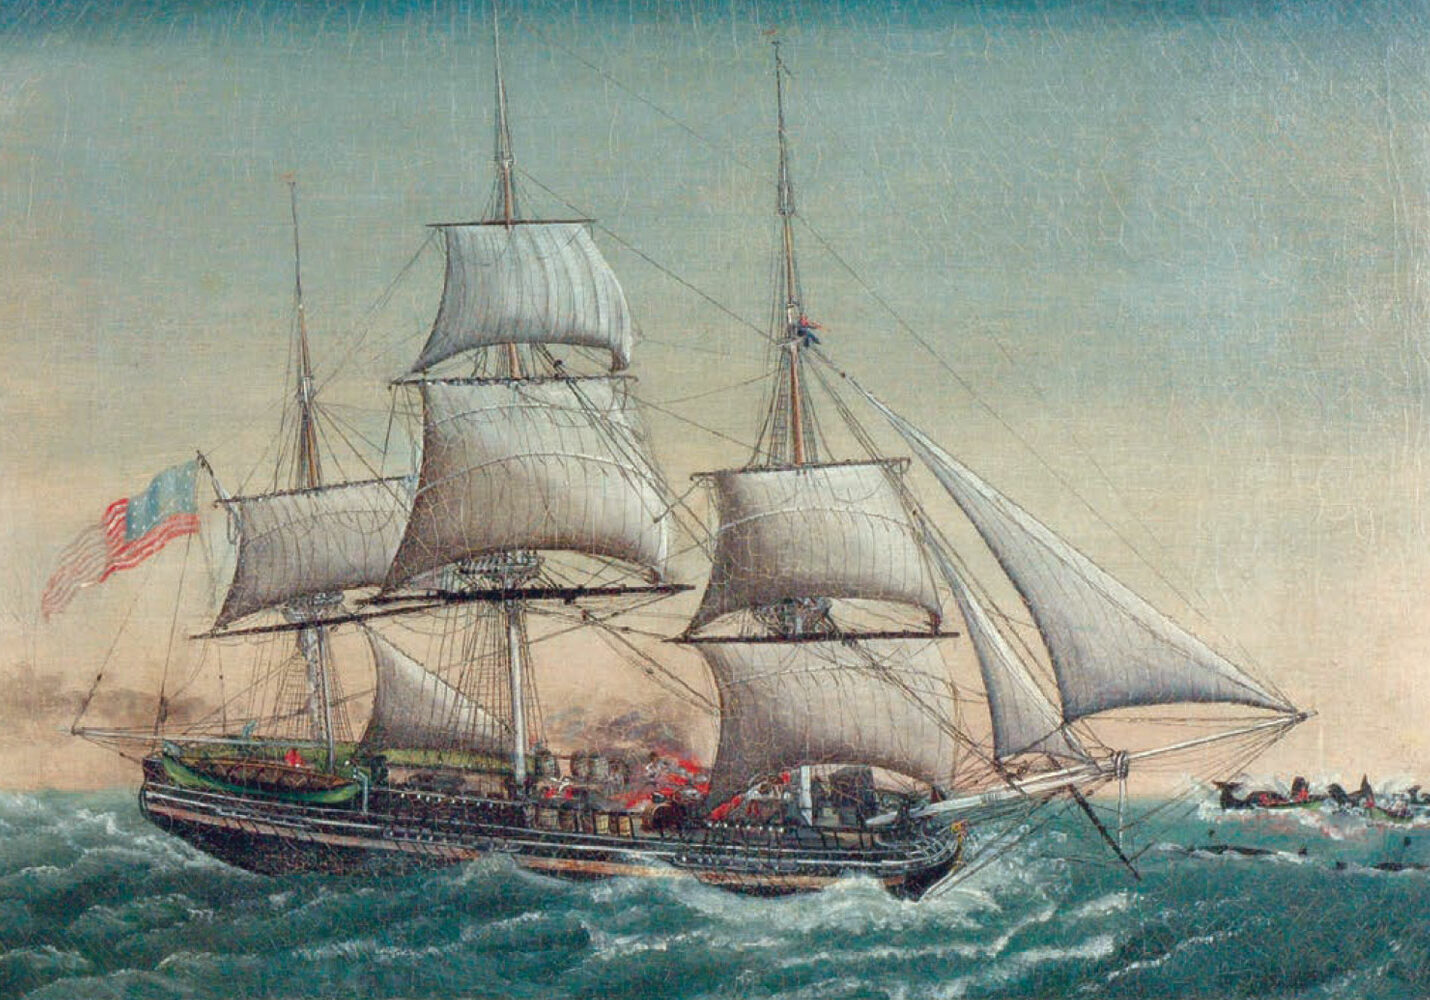 “Ship Spermo Trying With Boats Among Whales On California 1821,” by J. Fisher, ca. 1823.